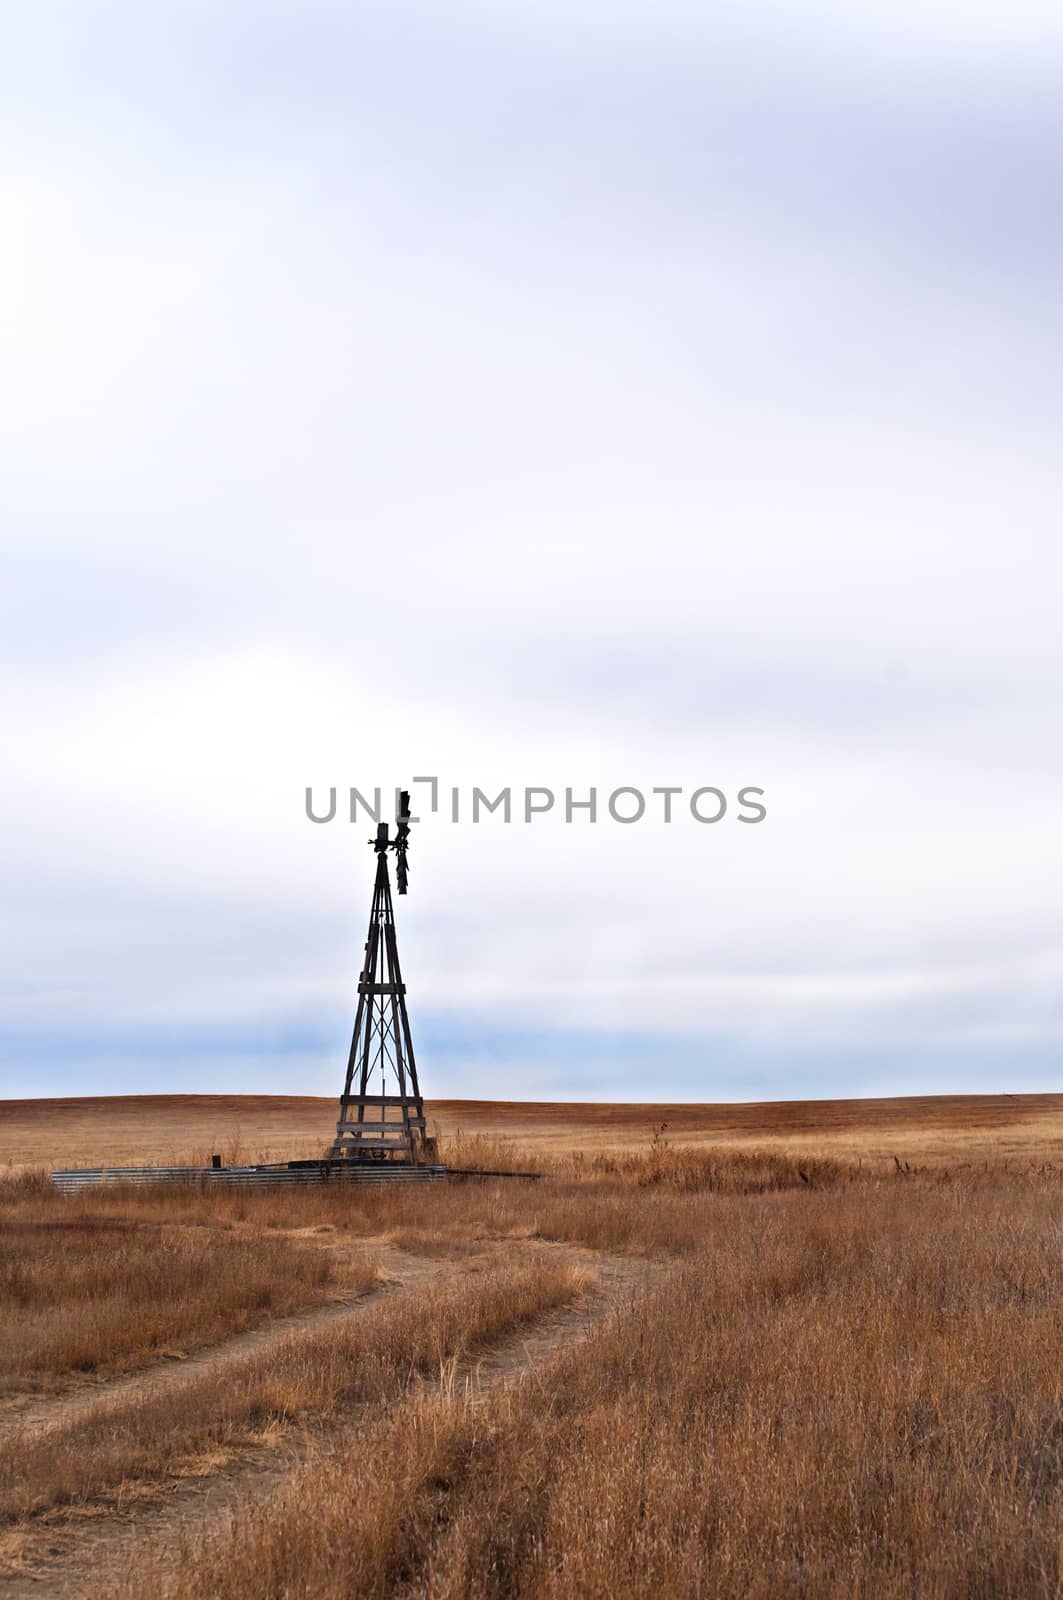 Windmill to pump livestock water on the eastern Colorado plains in the USA.